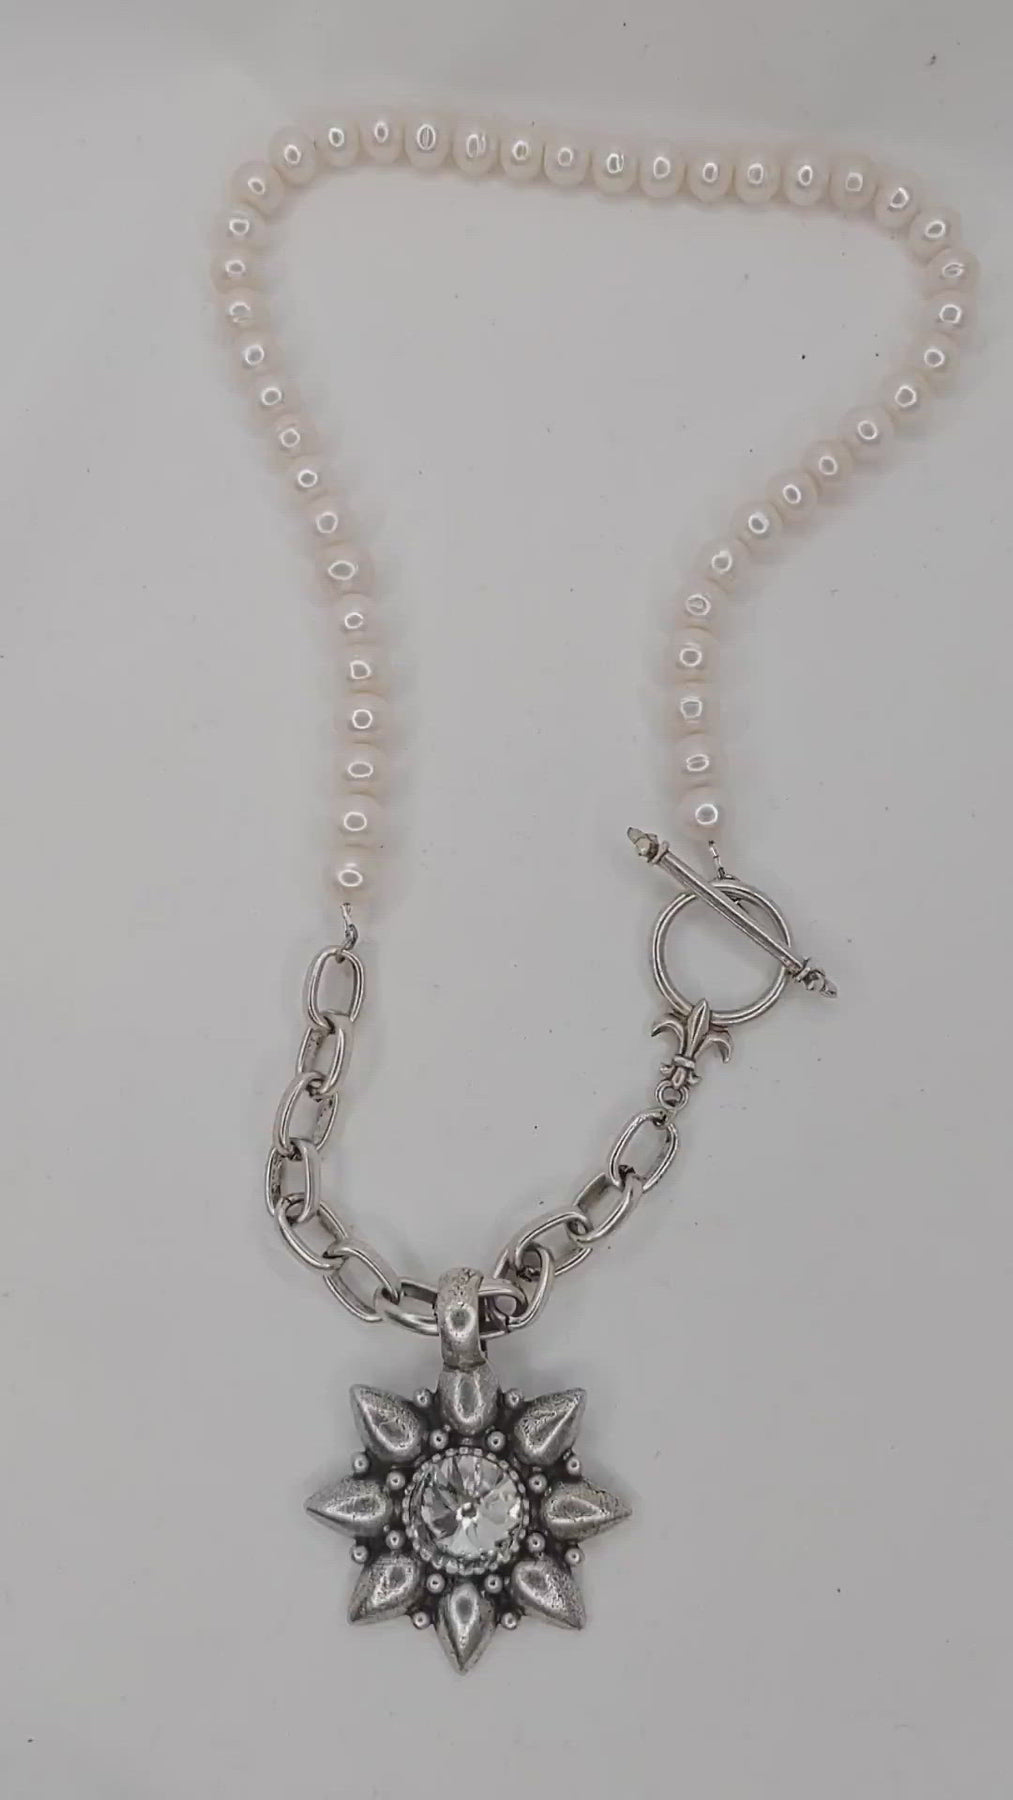 Handmade silver chain necklace. Crystal Star Cast Pendant On